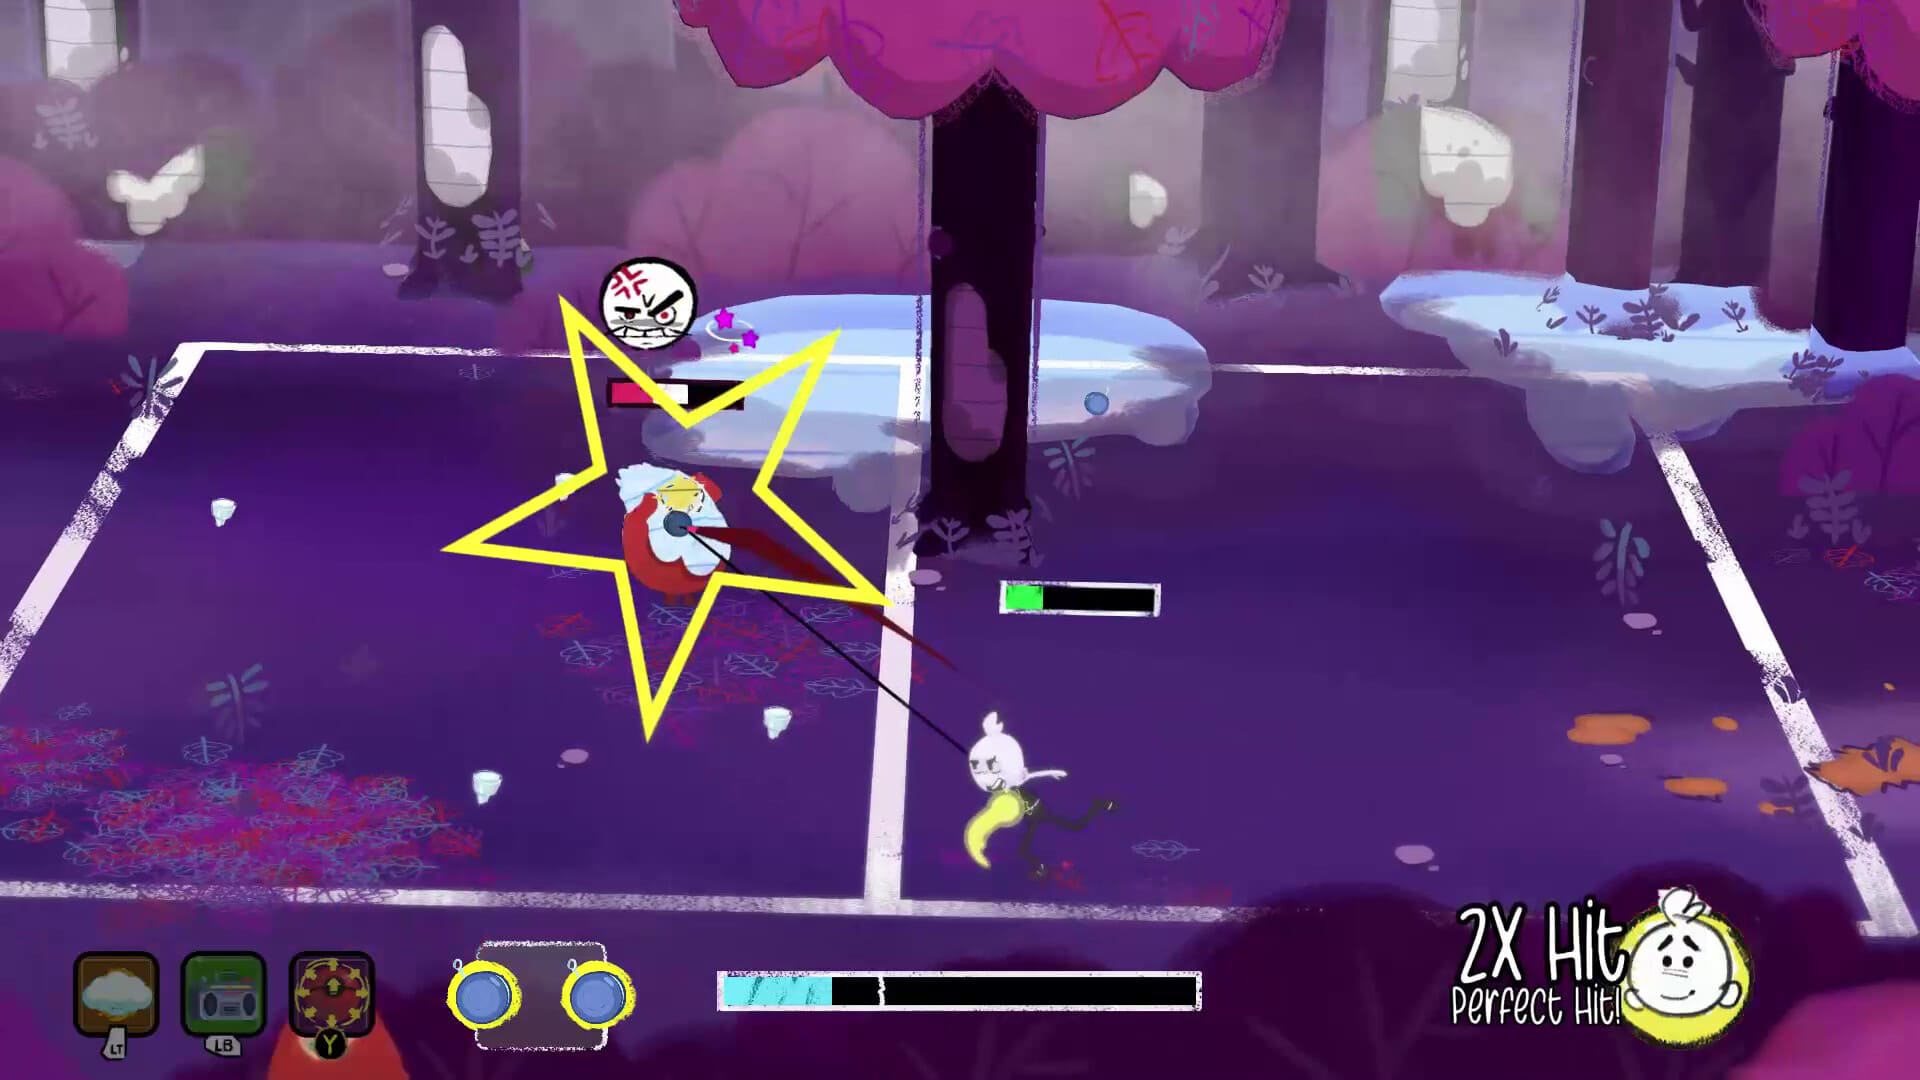 Ink Inside screenshot of Stick throwing a dodgeball at an enemy and perfect hitting them